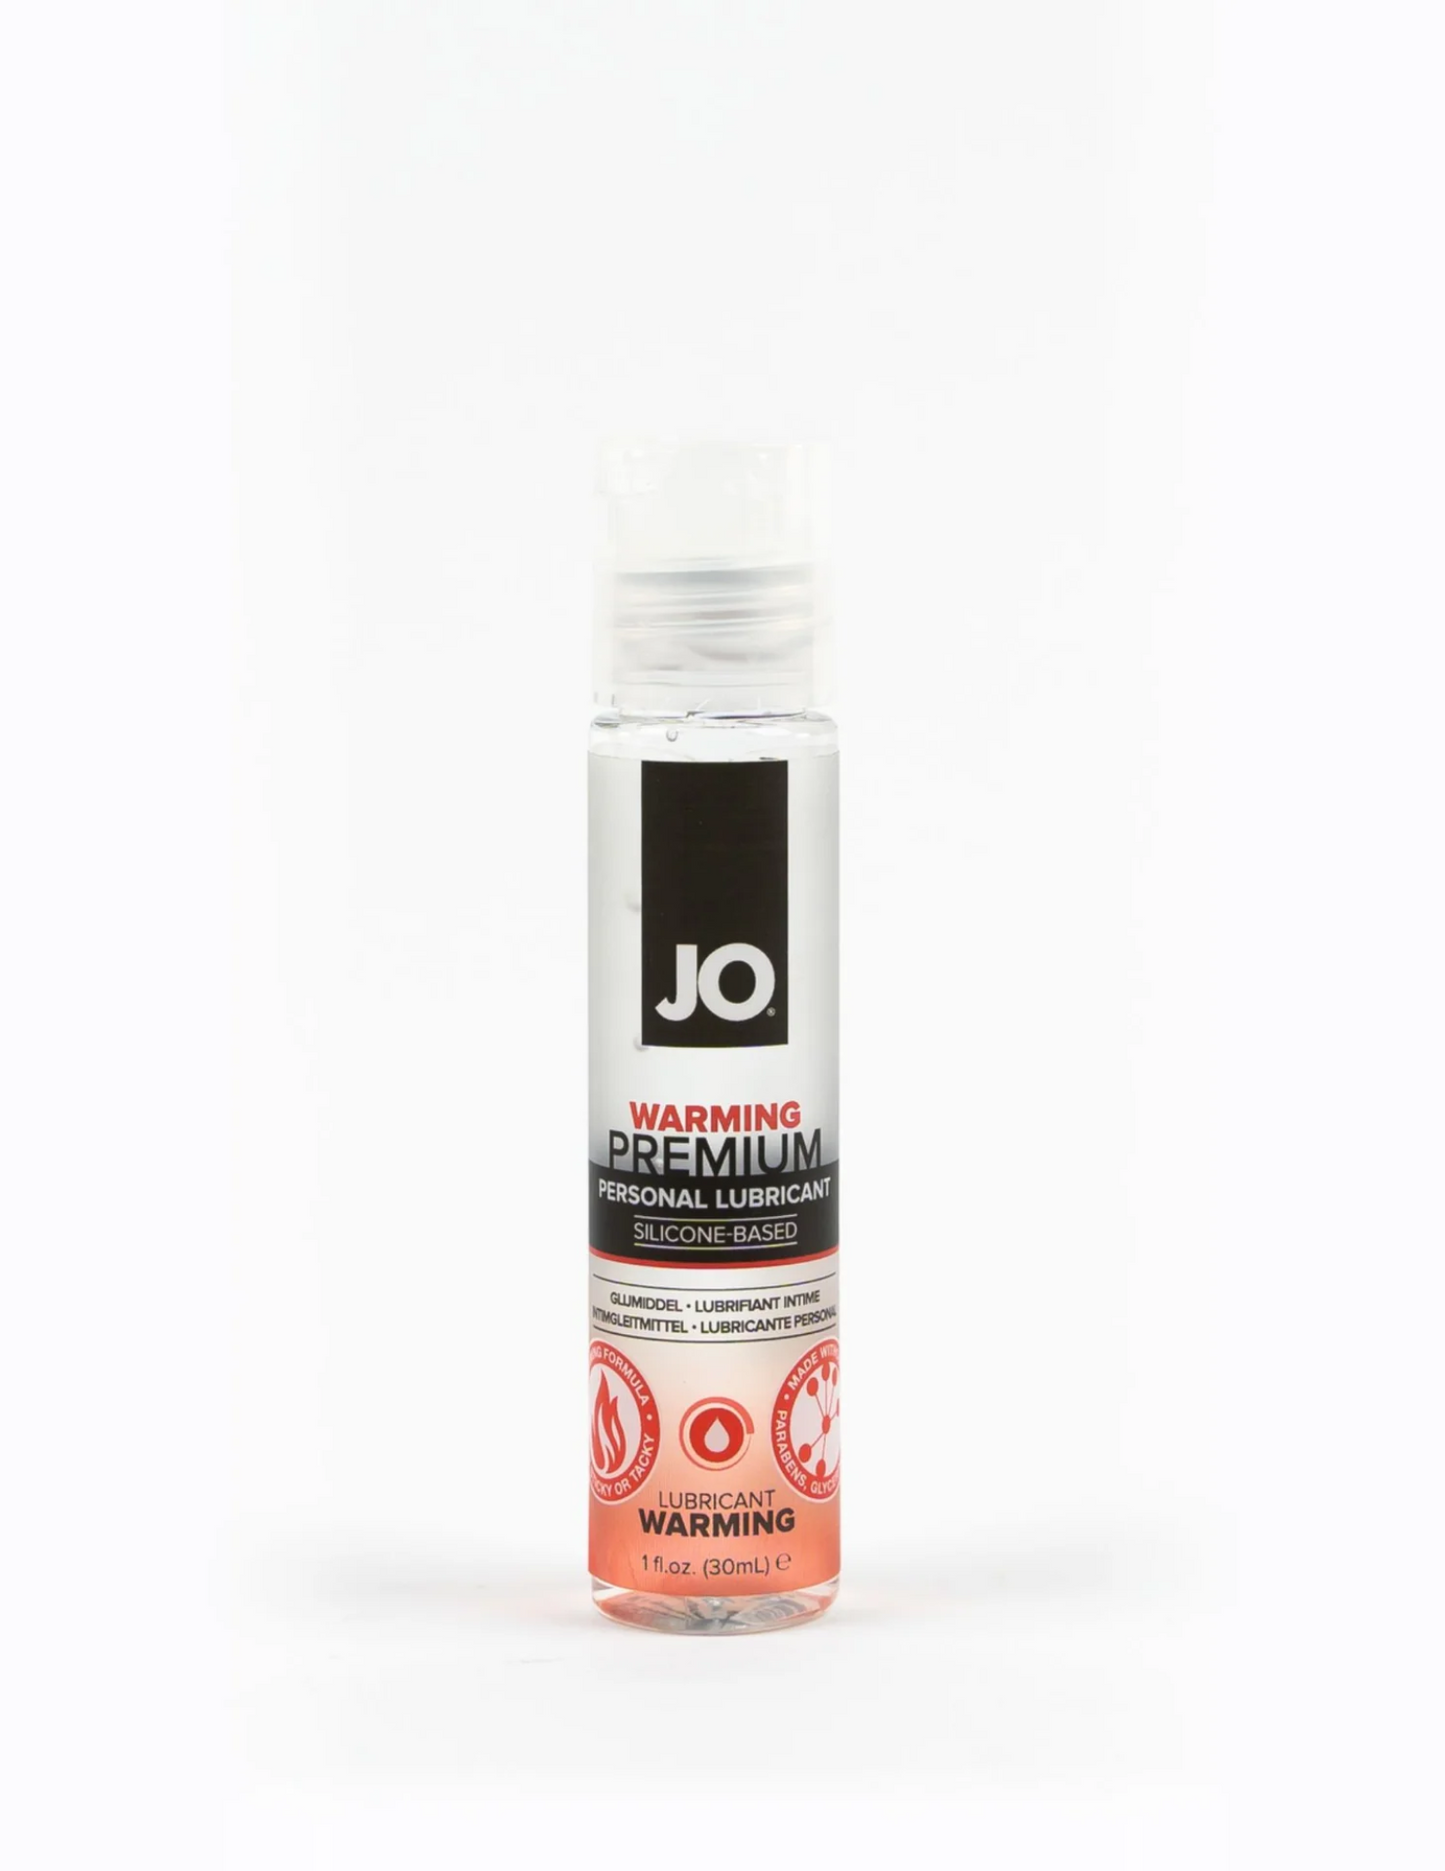 Photo of the front of the bottle of JO Premium Silicone Warming Lubricant (1oz).